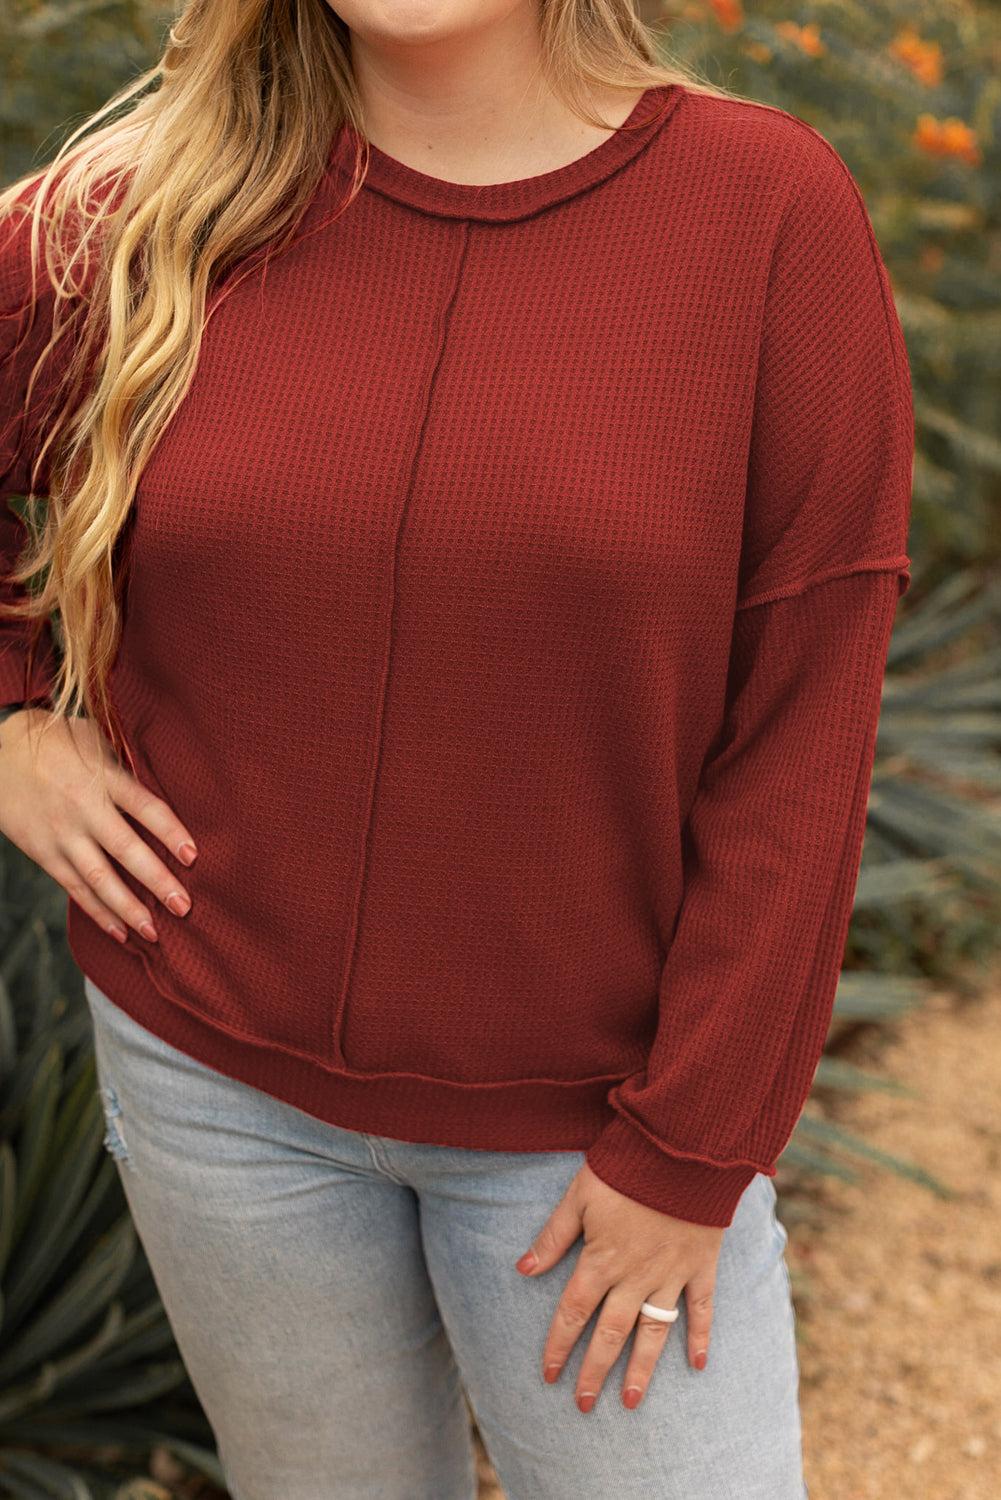 Gold Flame Exposed Seam Detail Waffle Knit Plus Size Top